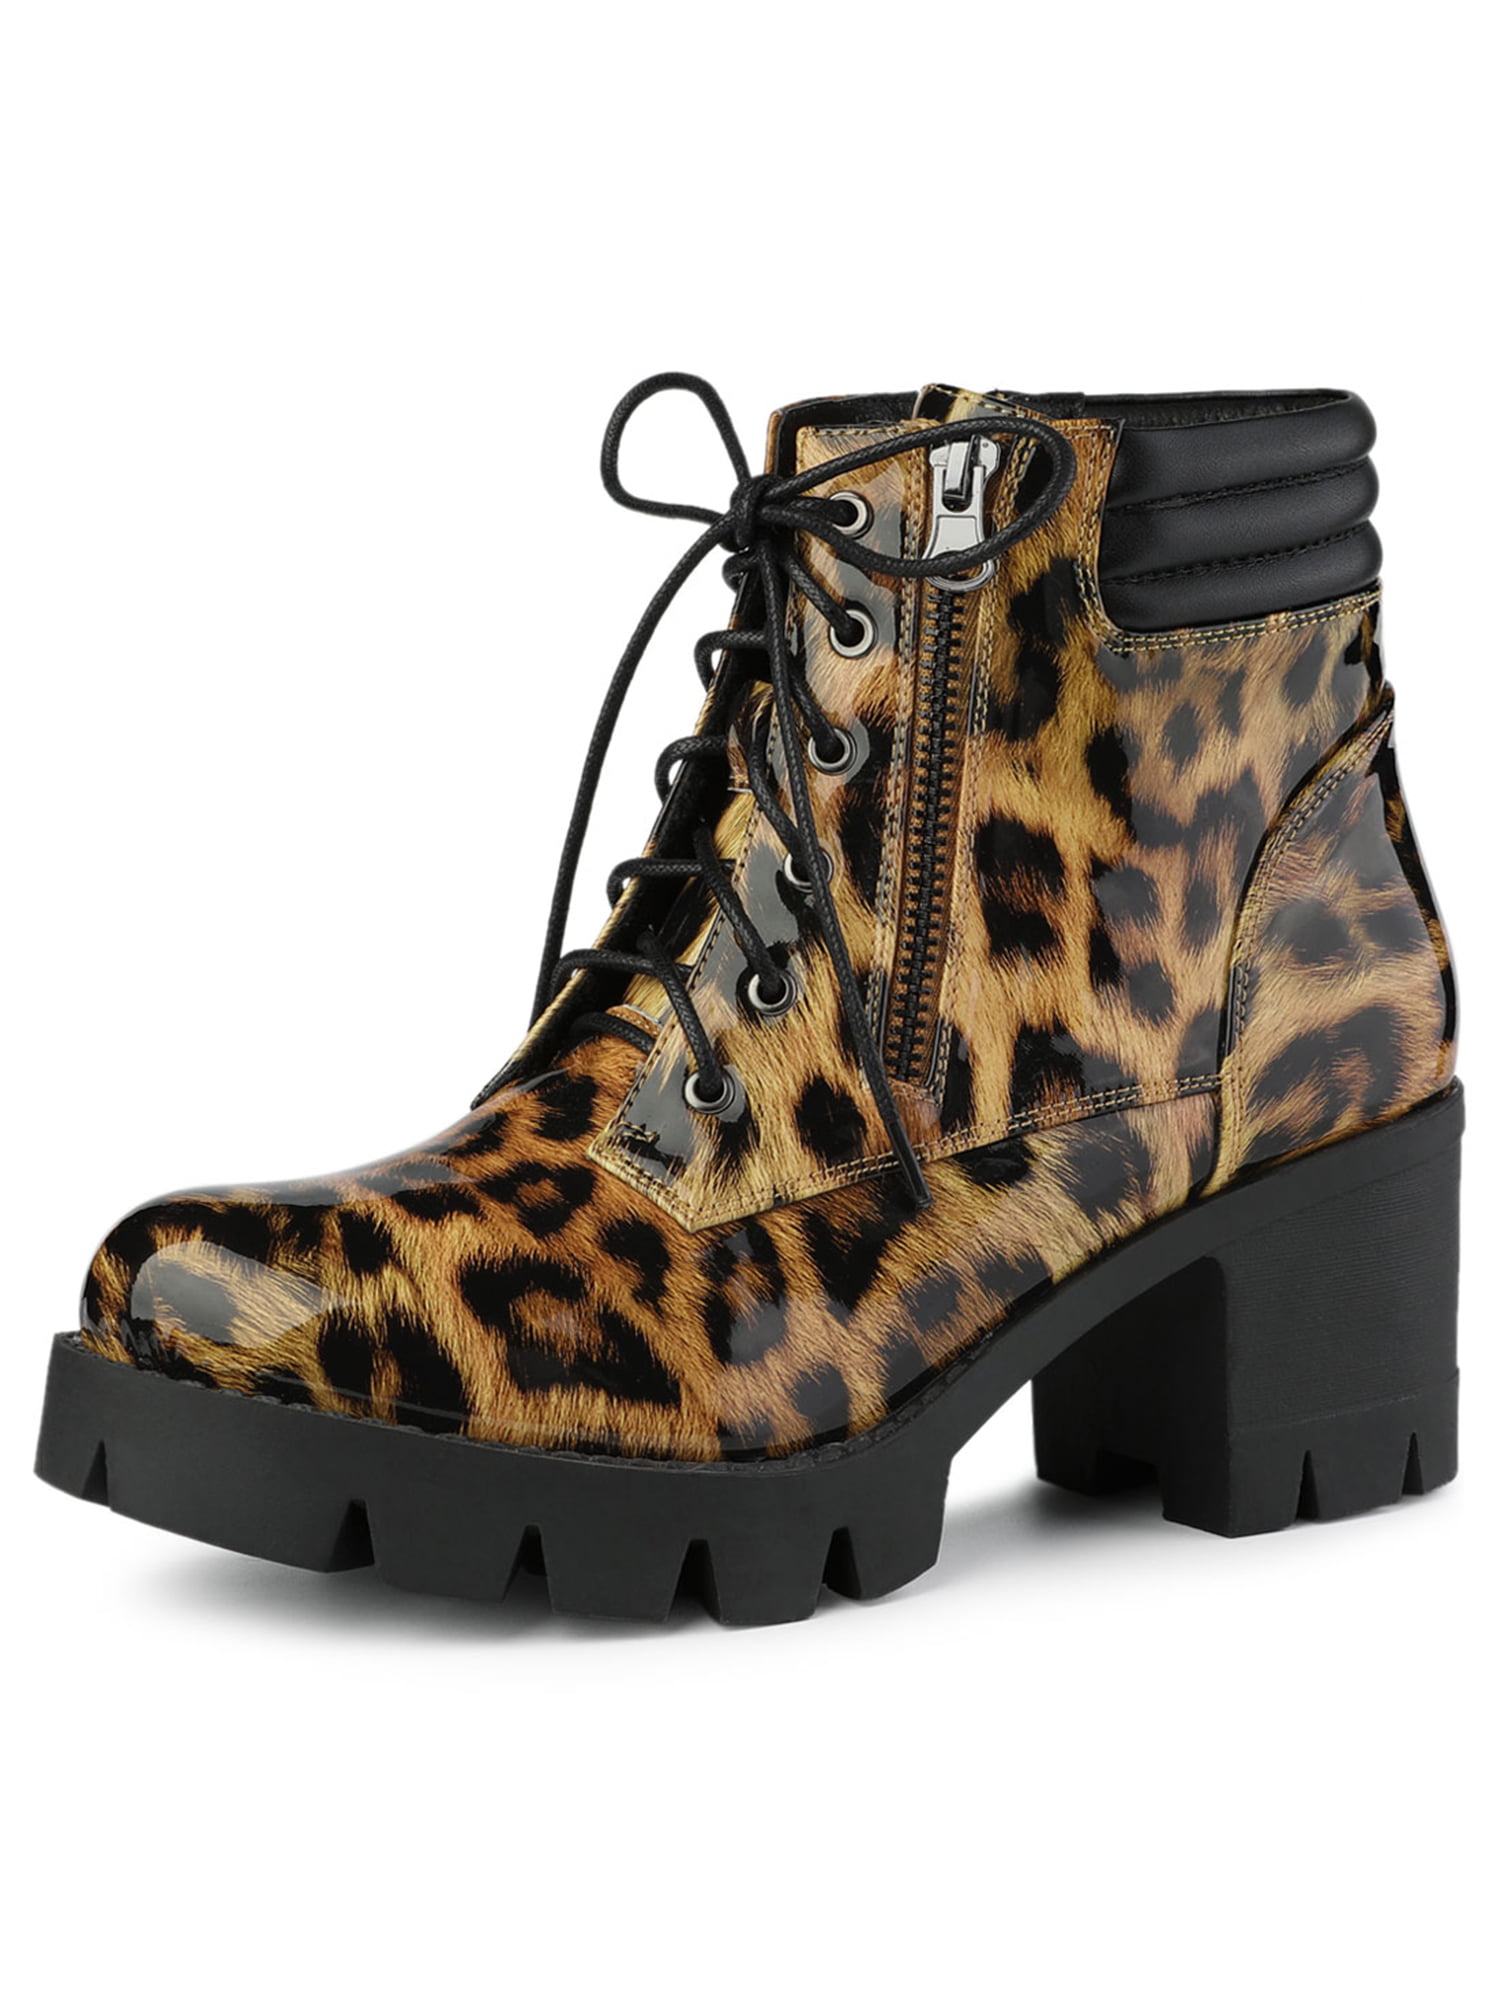 leopard print chunky boots